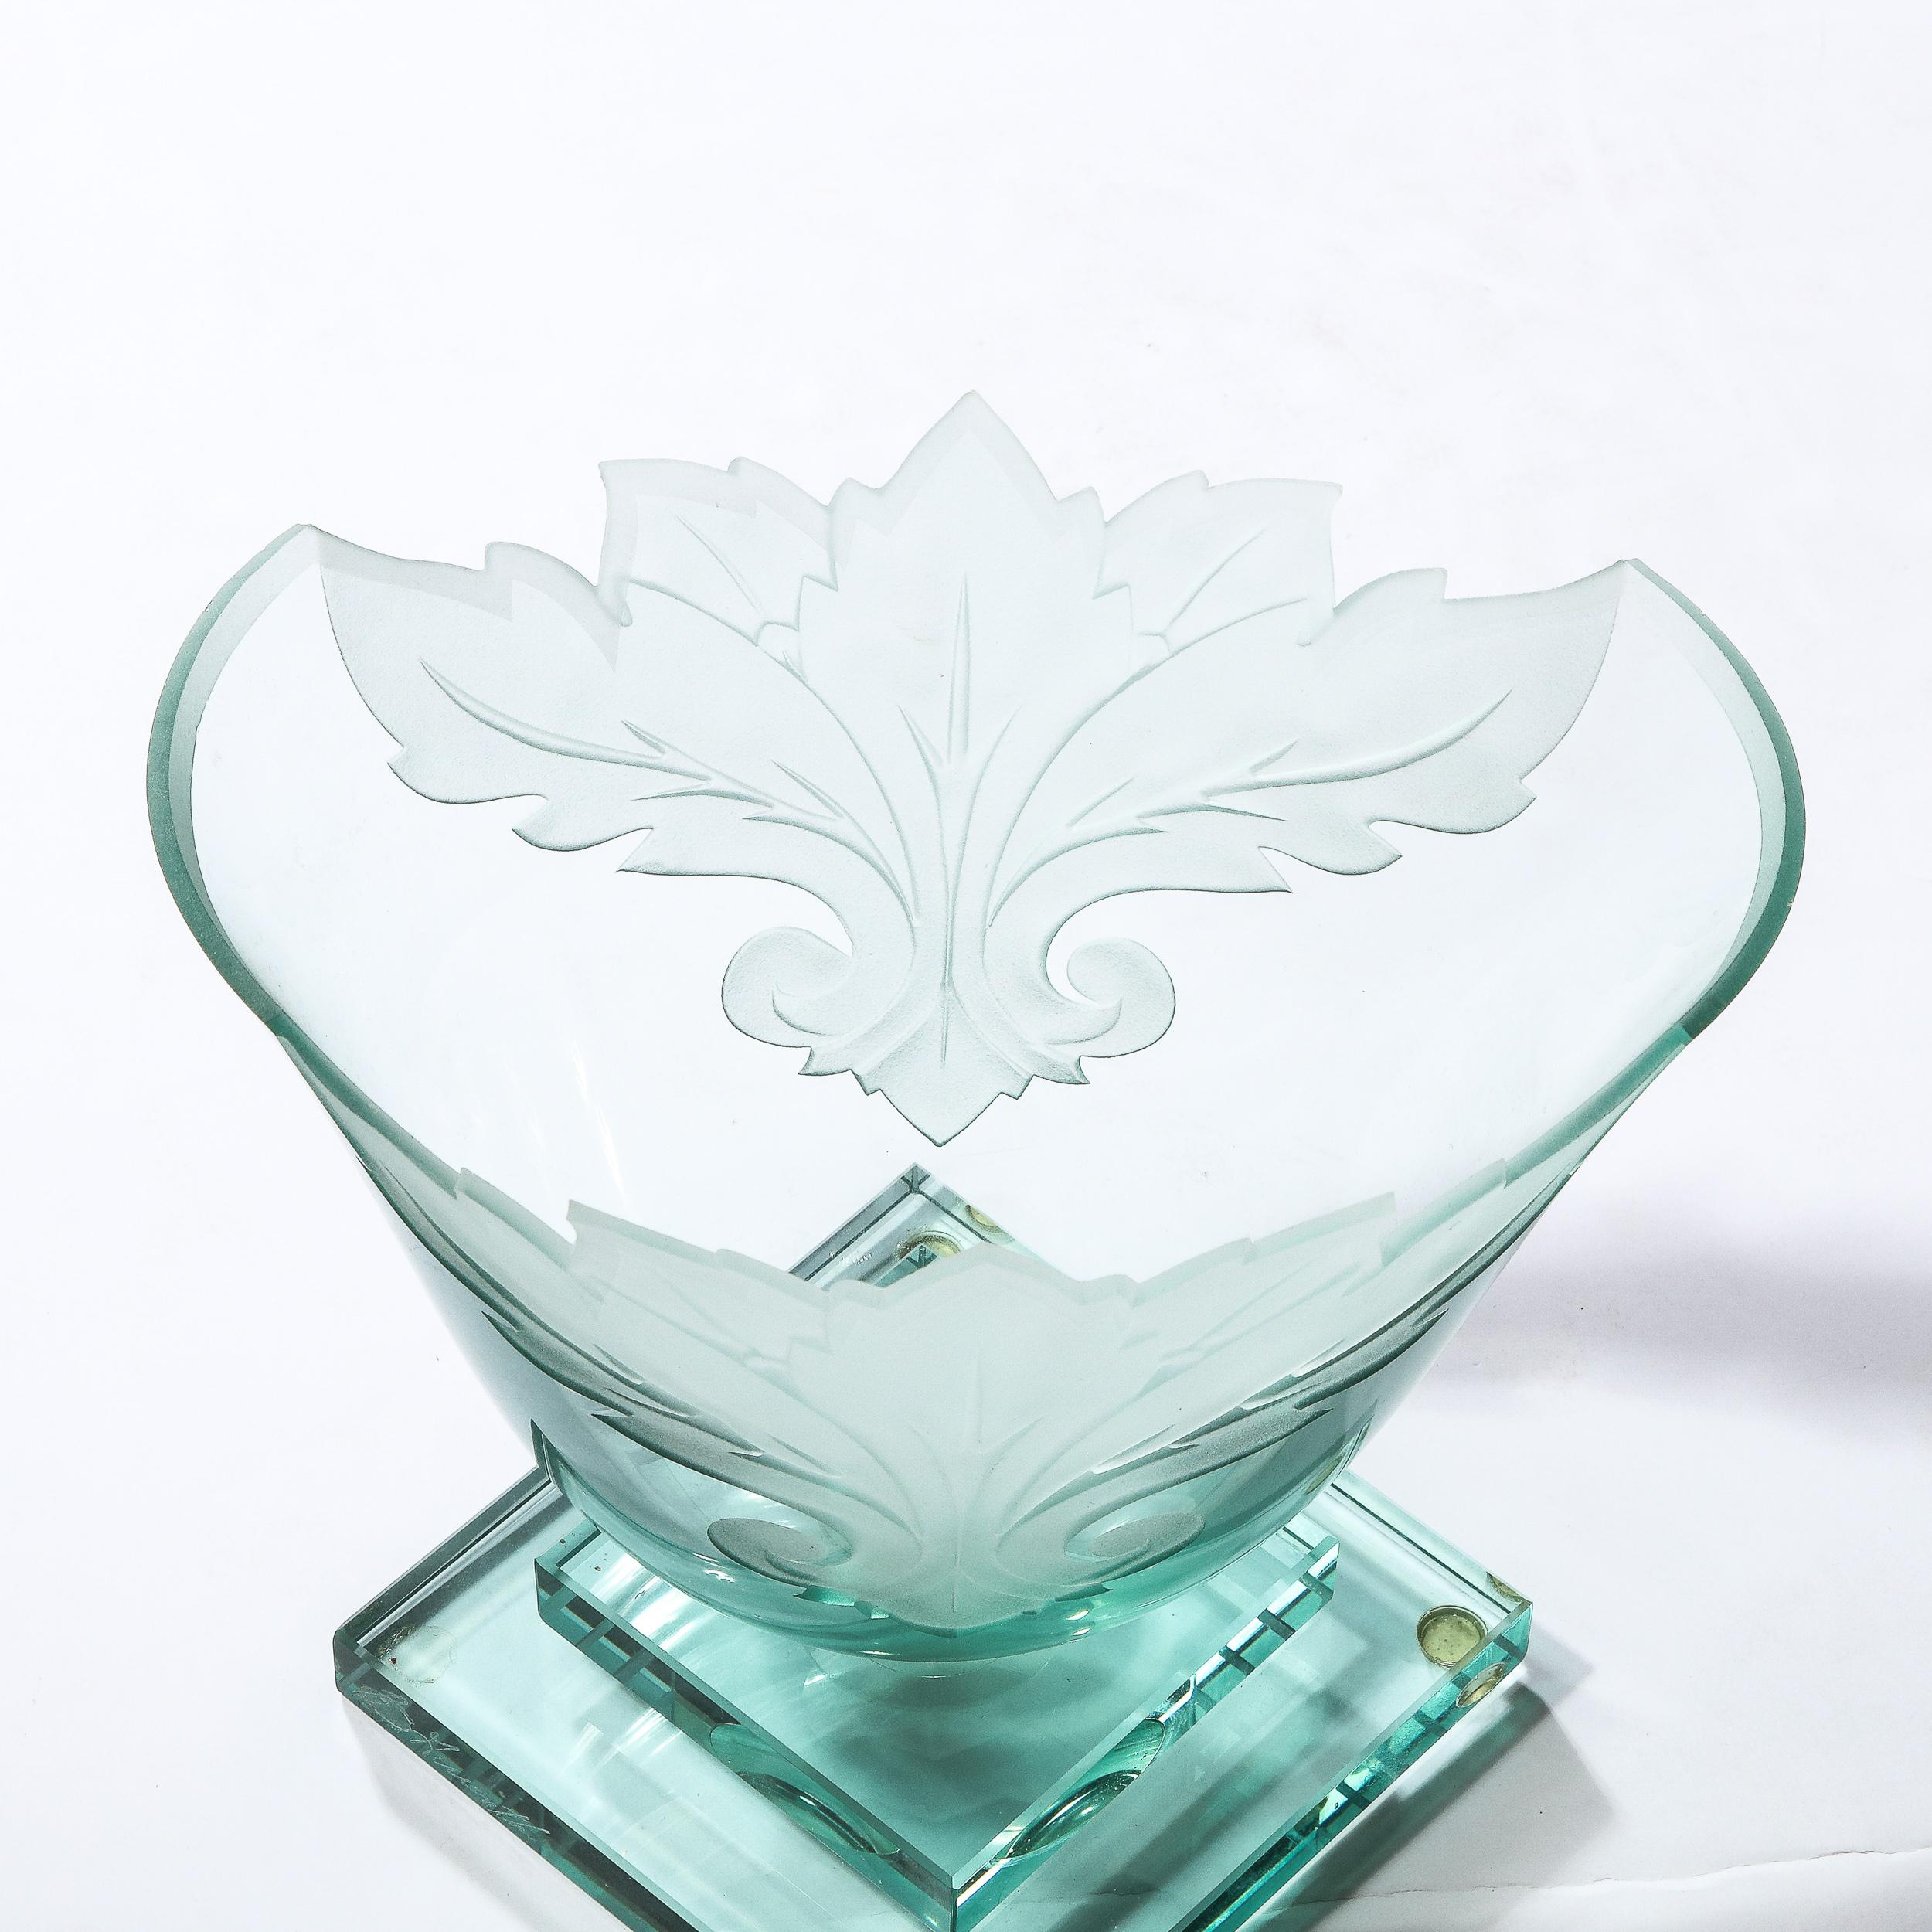 Frosted and Etched Cut Glass Leaf Vase/Bowl on Geometric Base by Robert Guenther For Sale 3